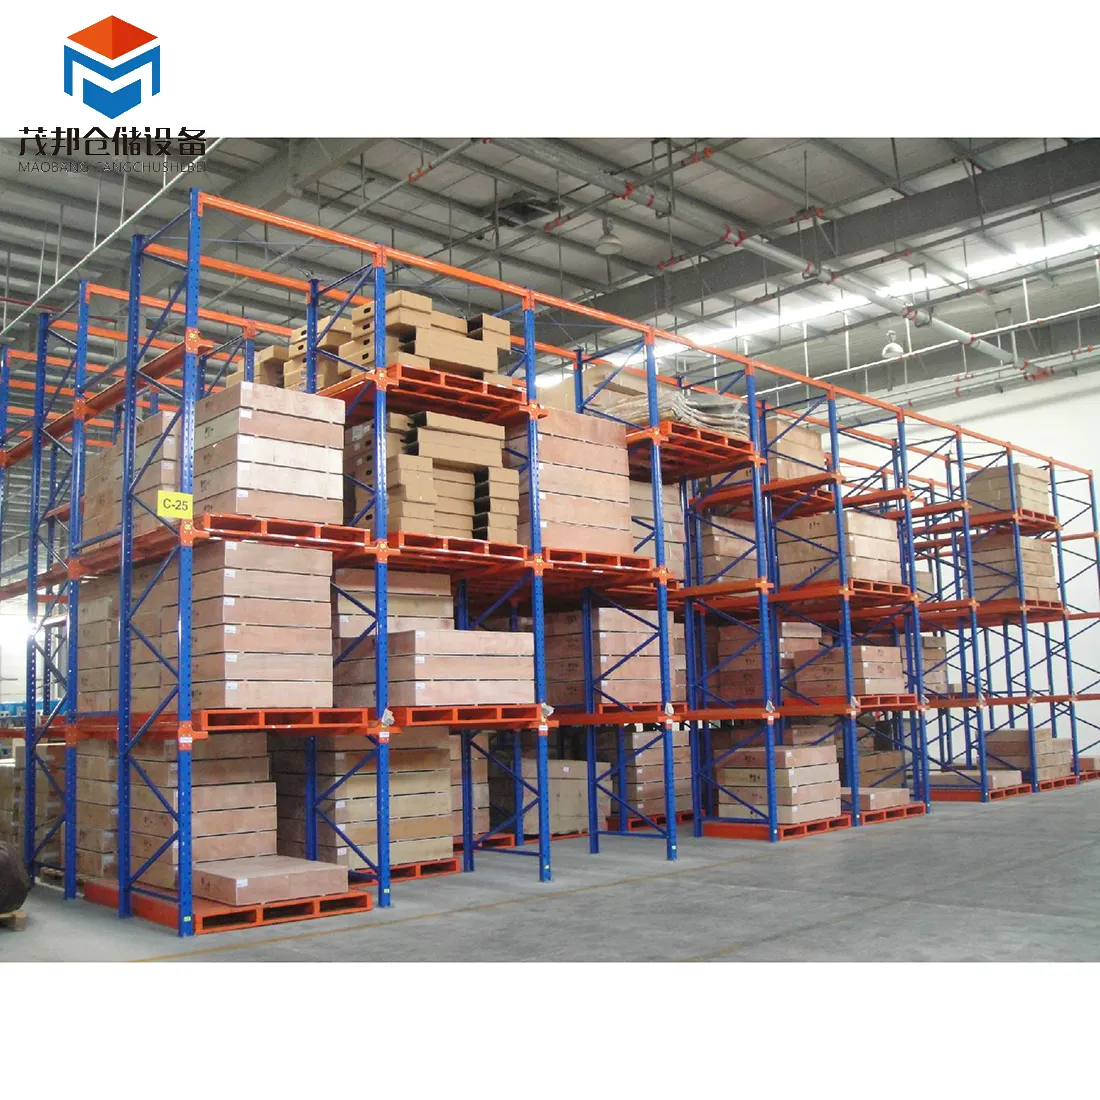 High Quality Heavy Duty Metal Wire Steel Storage Shelving Drive In Drive Thru Pallet Warehouse Racking System